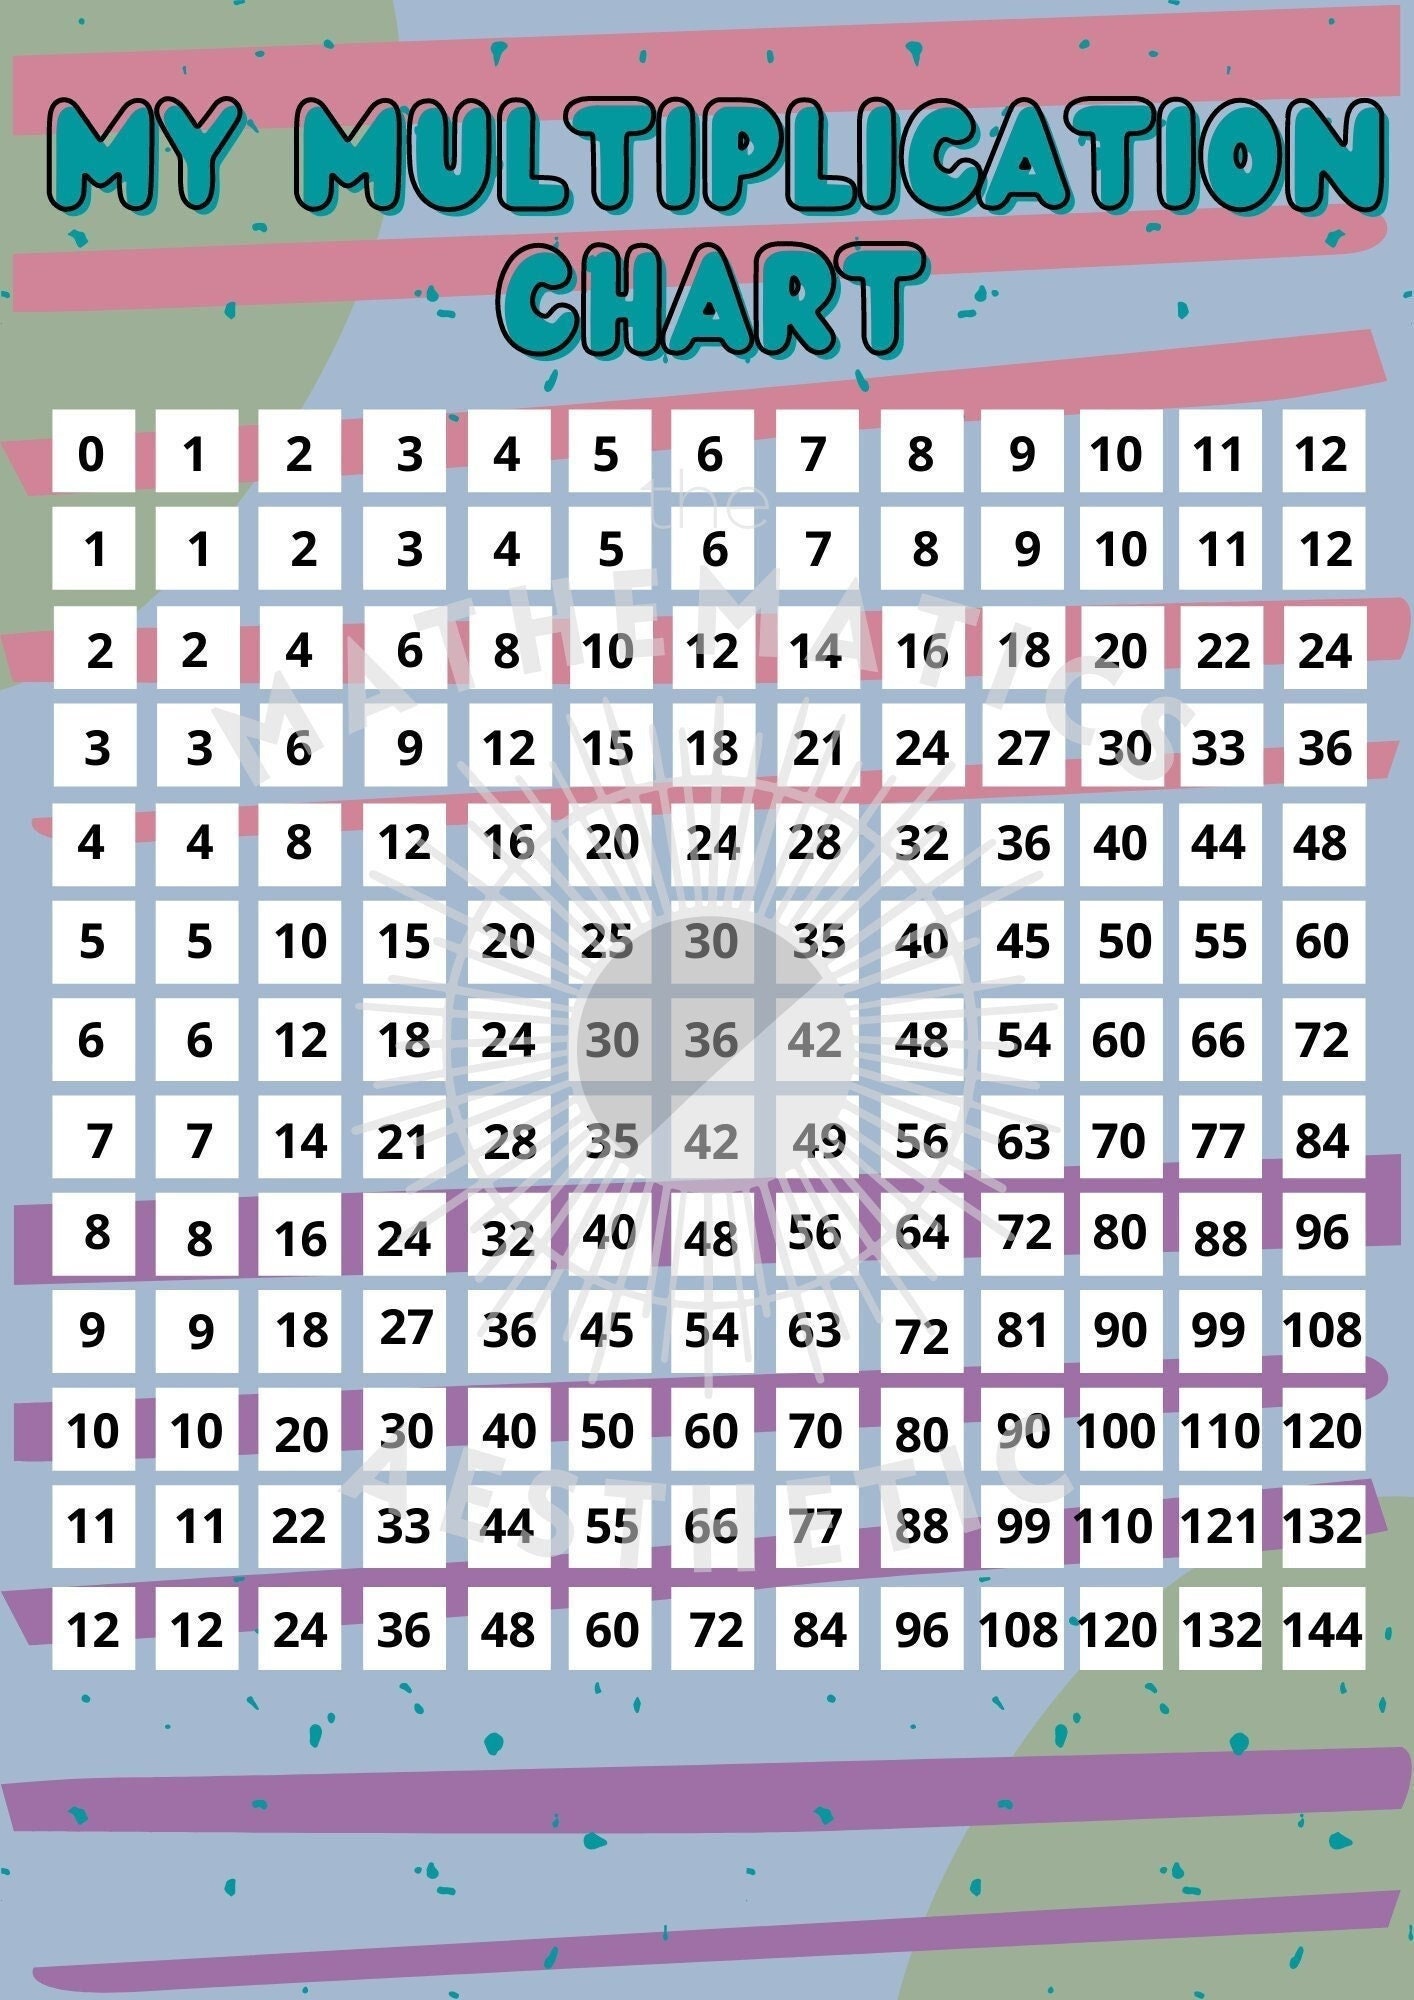 FROZEN Disney's Elsa & Anna with Olaf Sven Times Tables Multiplication Poster for KIDS Educational Learning Maths Poster Gloss Laminated